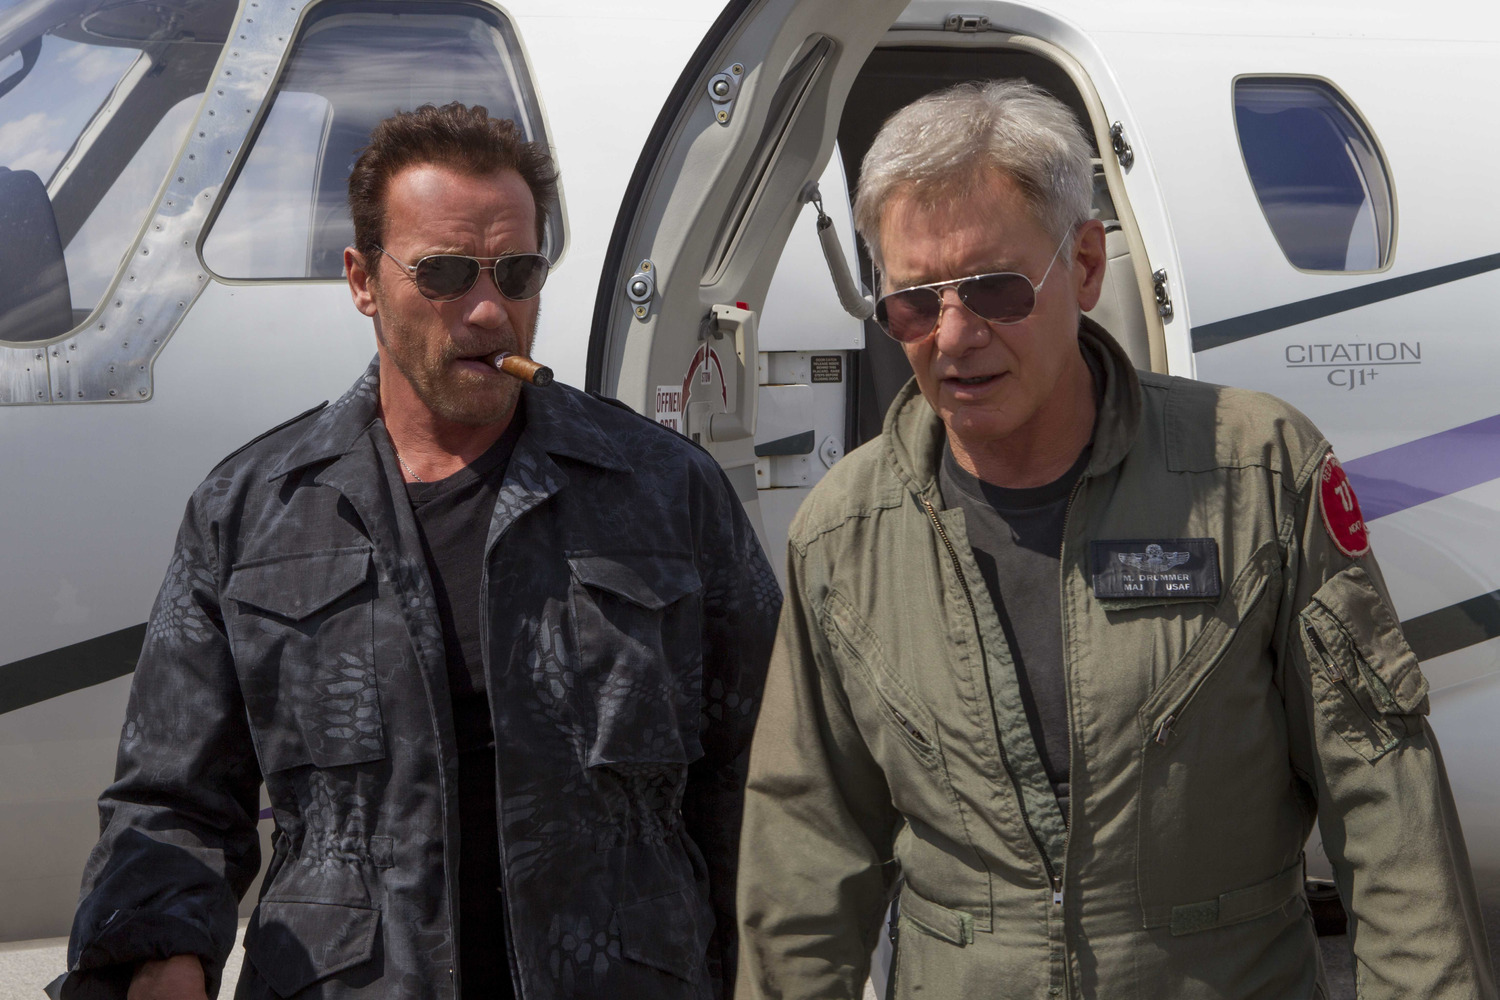 expendables-3-the-expendables-3-20-08-2014-21-g.jpg